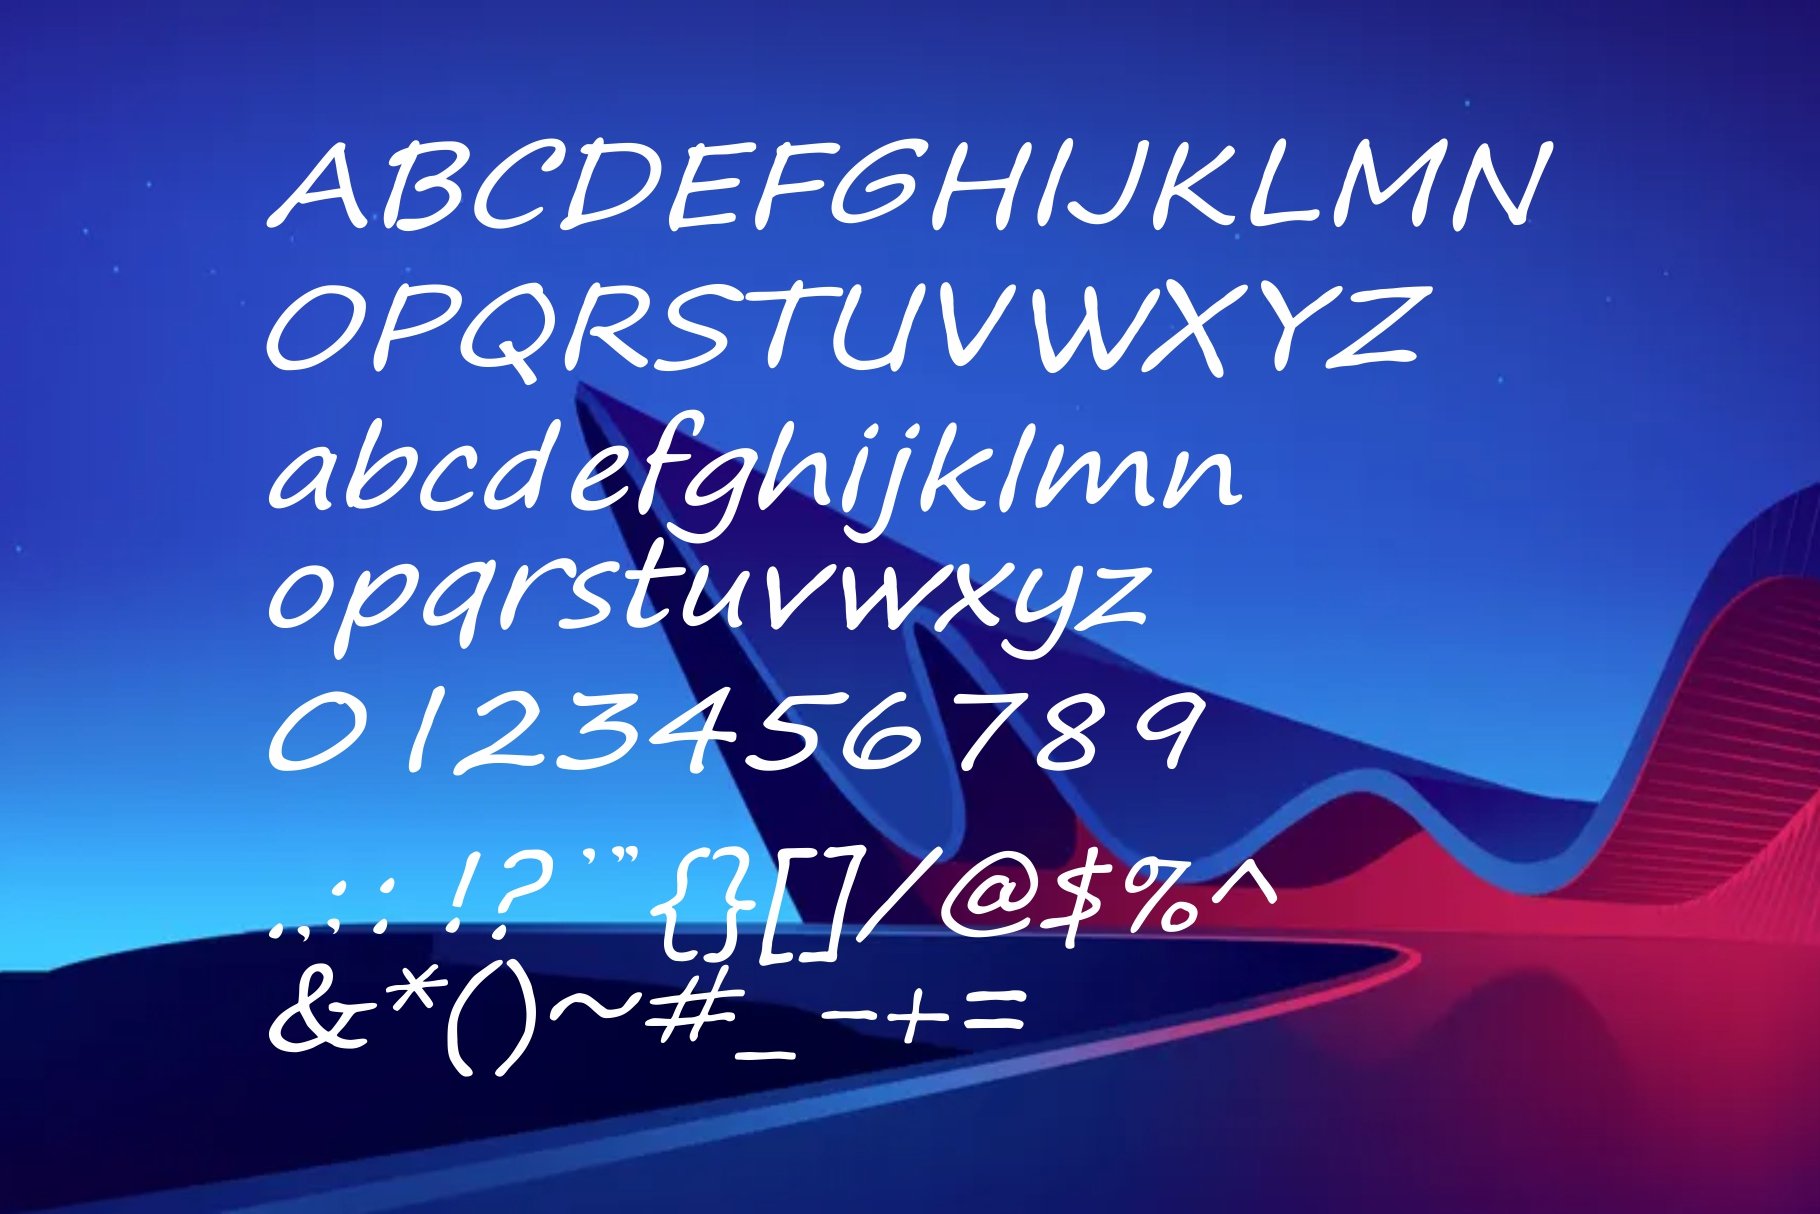 A set of letters and numbers with a blue background.